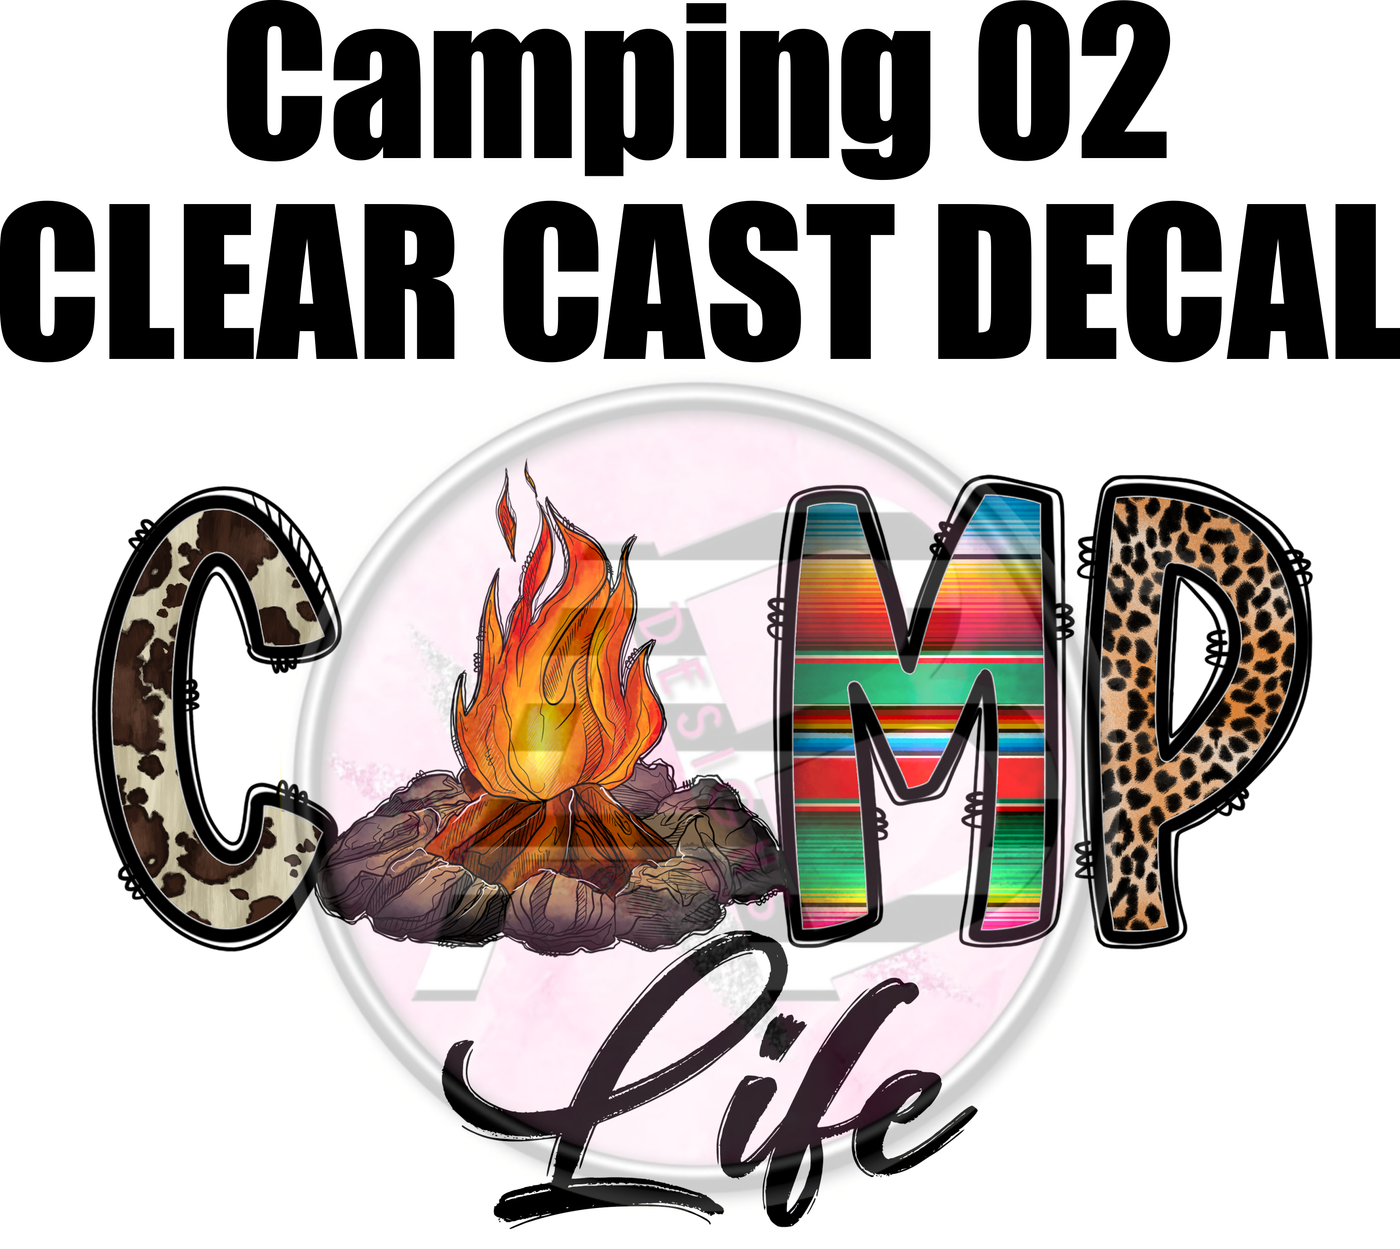 Camping 02 - Clear Cast Decal